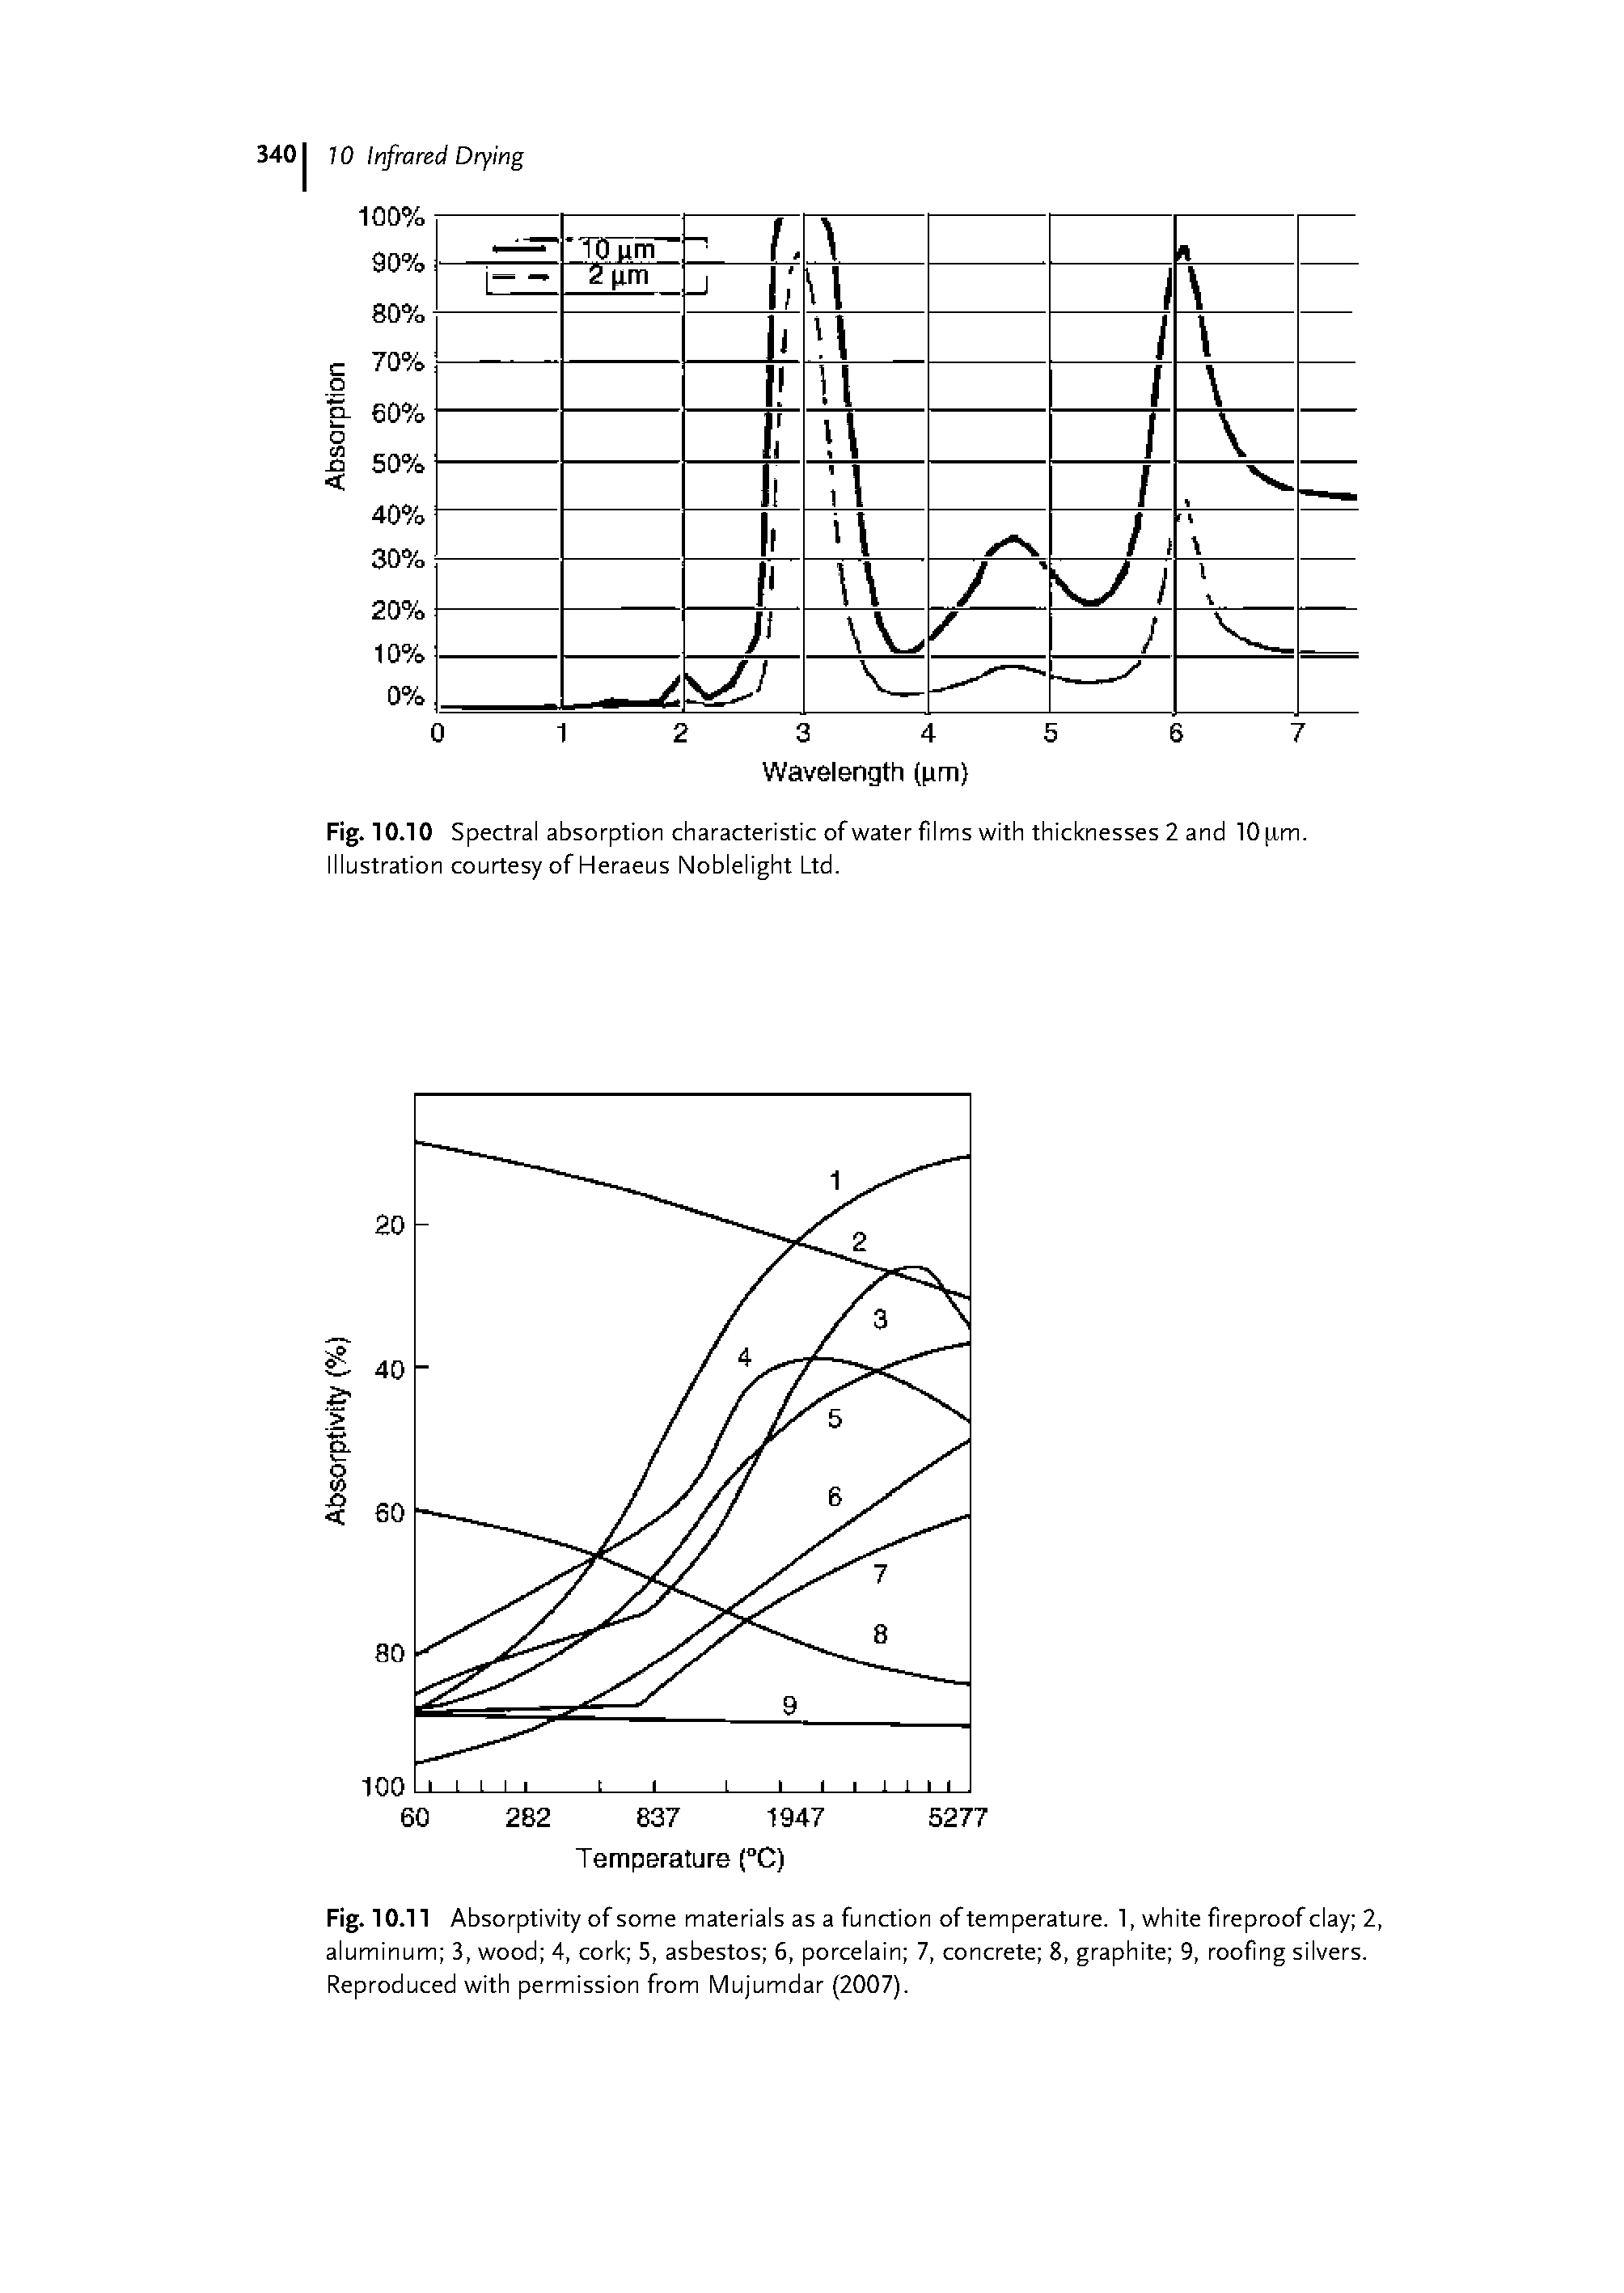 Fig. 10.10 Spectral absorption characteristic of water films with thicknesses 2 and 10 im. Illustration courtesy of Heraeus Noblelight Ltd.